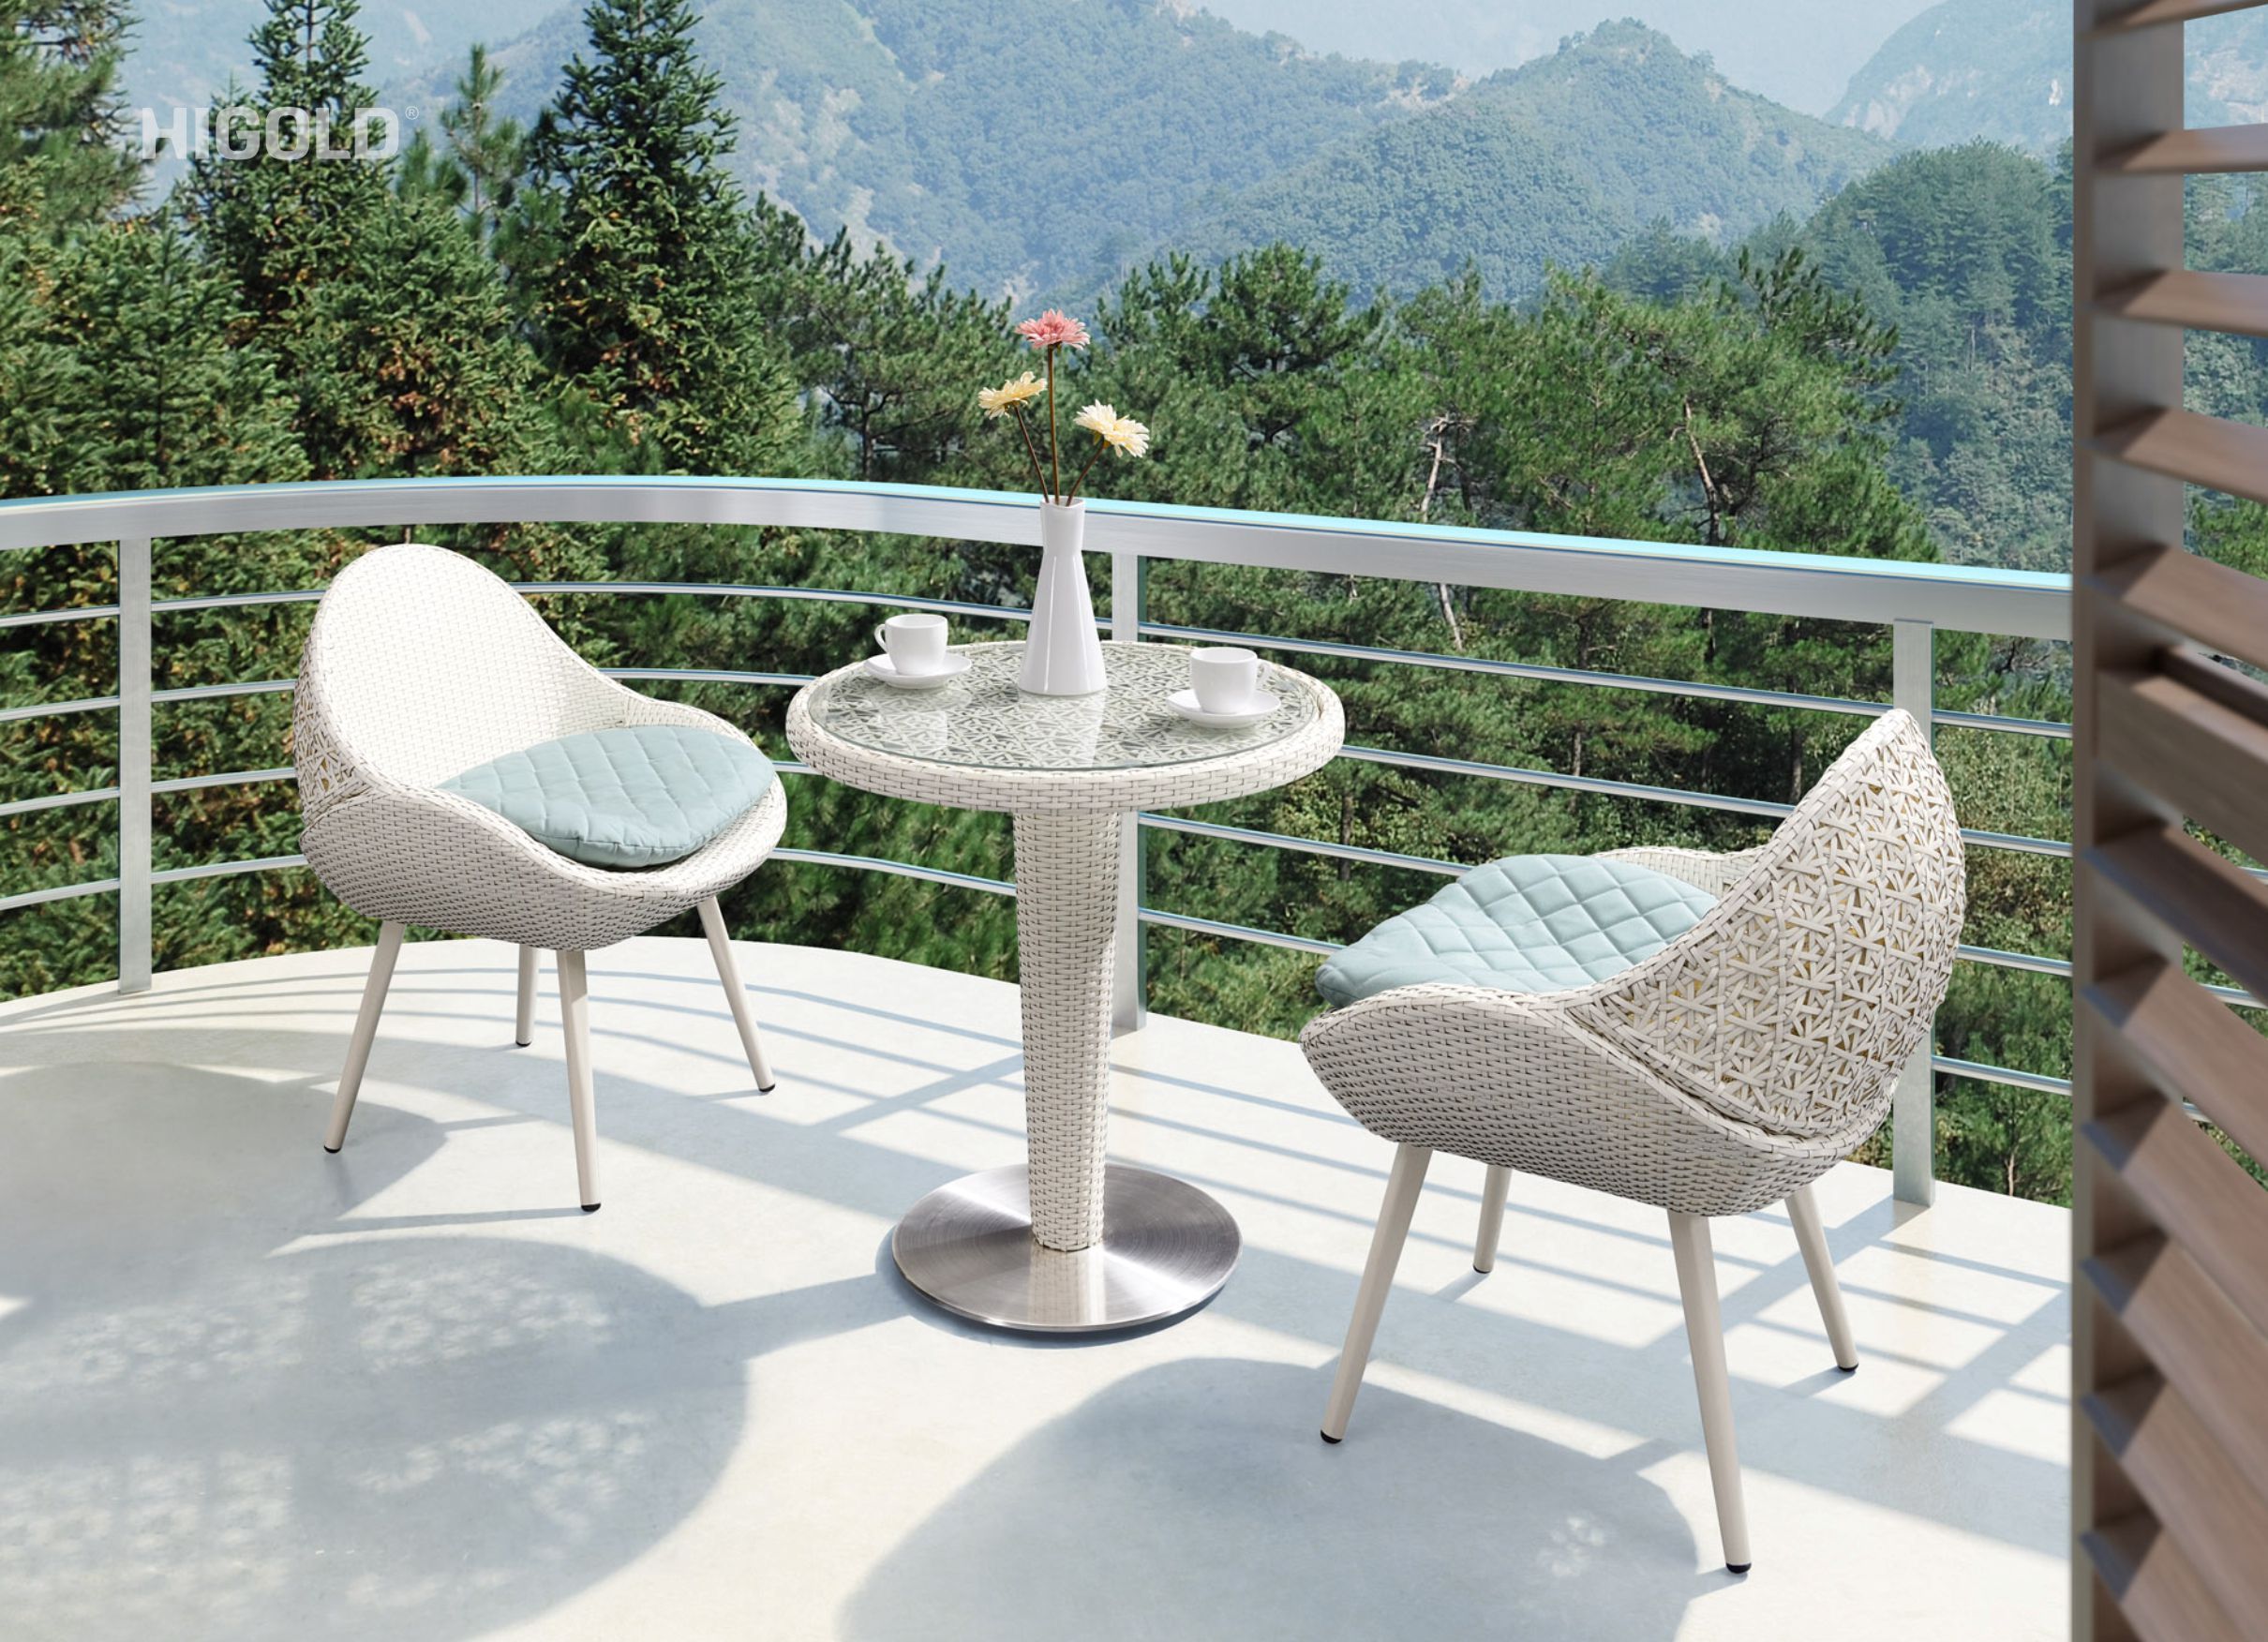 Tulip outdoor dining set for 6